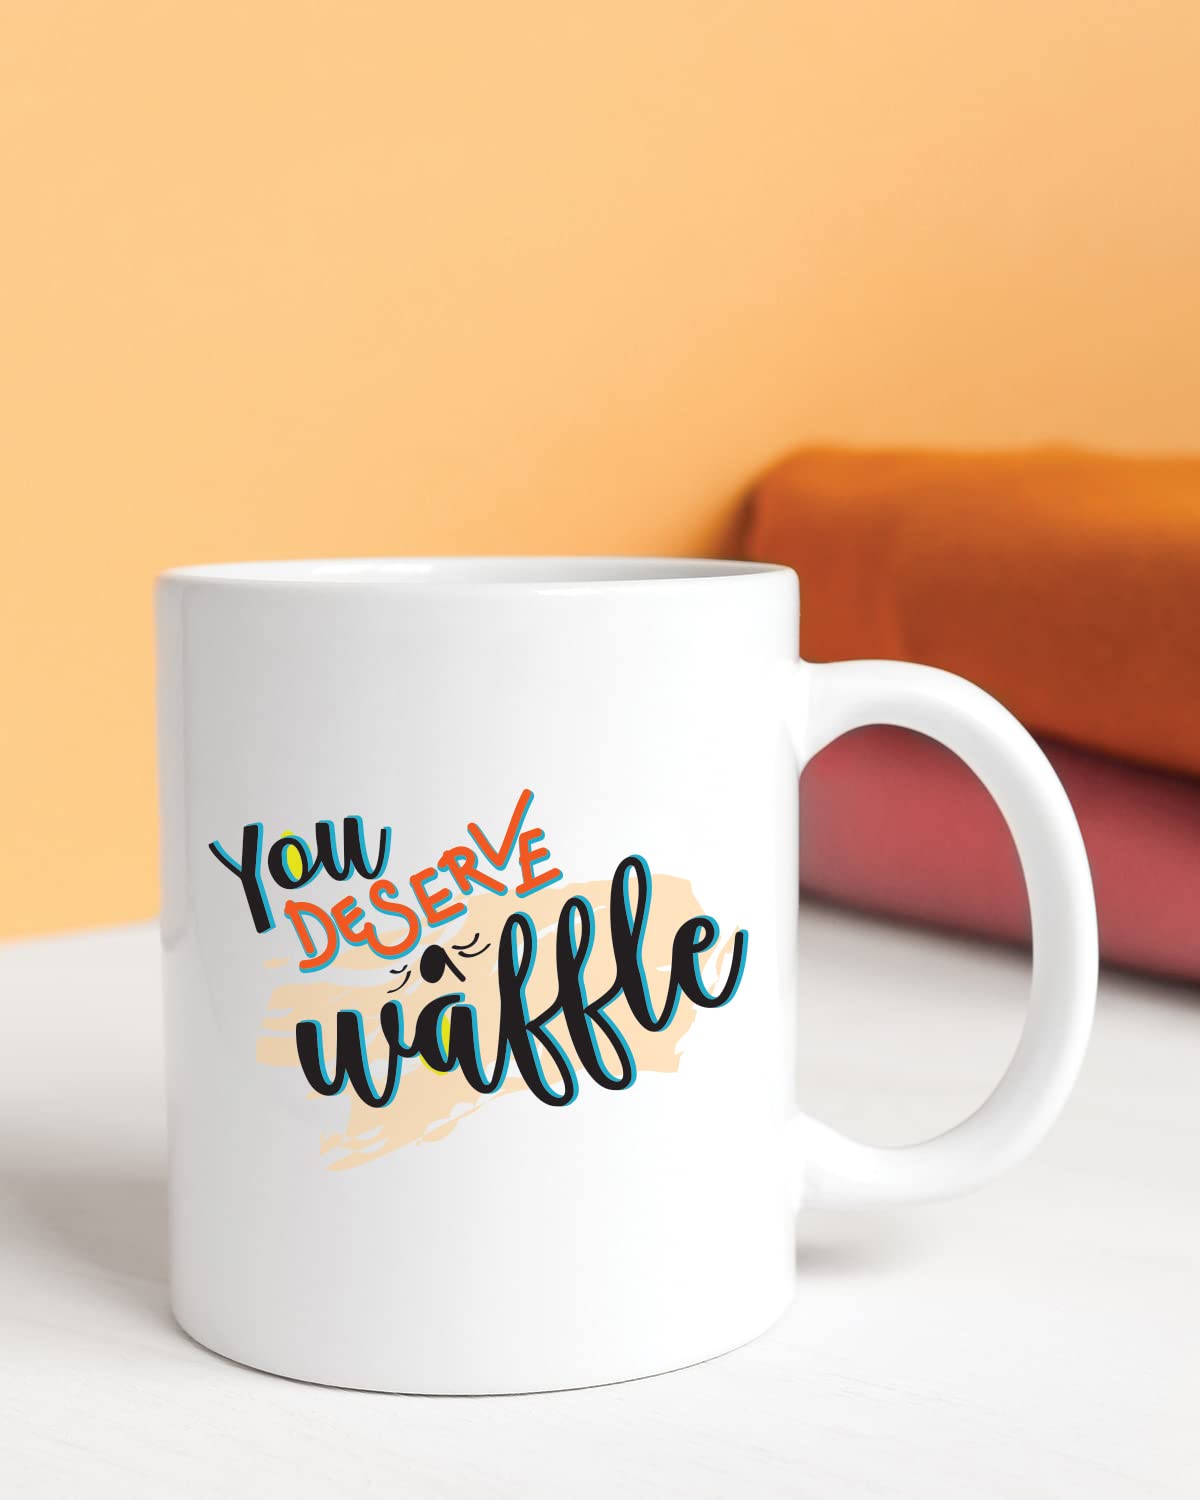 You Deserve A Waffle Coffee Mug - Birthday Gift, Motivational Mug, Printed with Inspiring Quotes, Positivity Mug, Inspirational Gift for Him & Her, Best Friend Gift, Gifts for Her, Cheer Up Gift